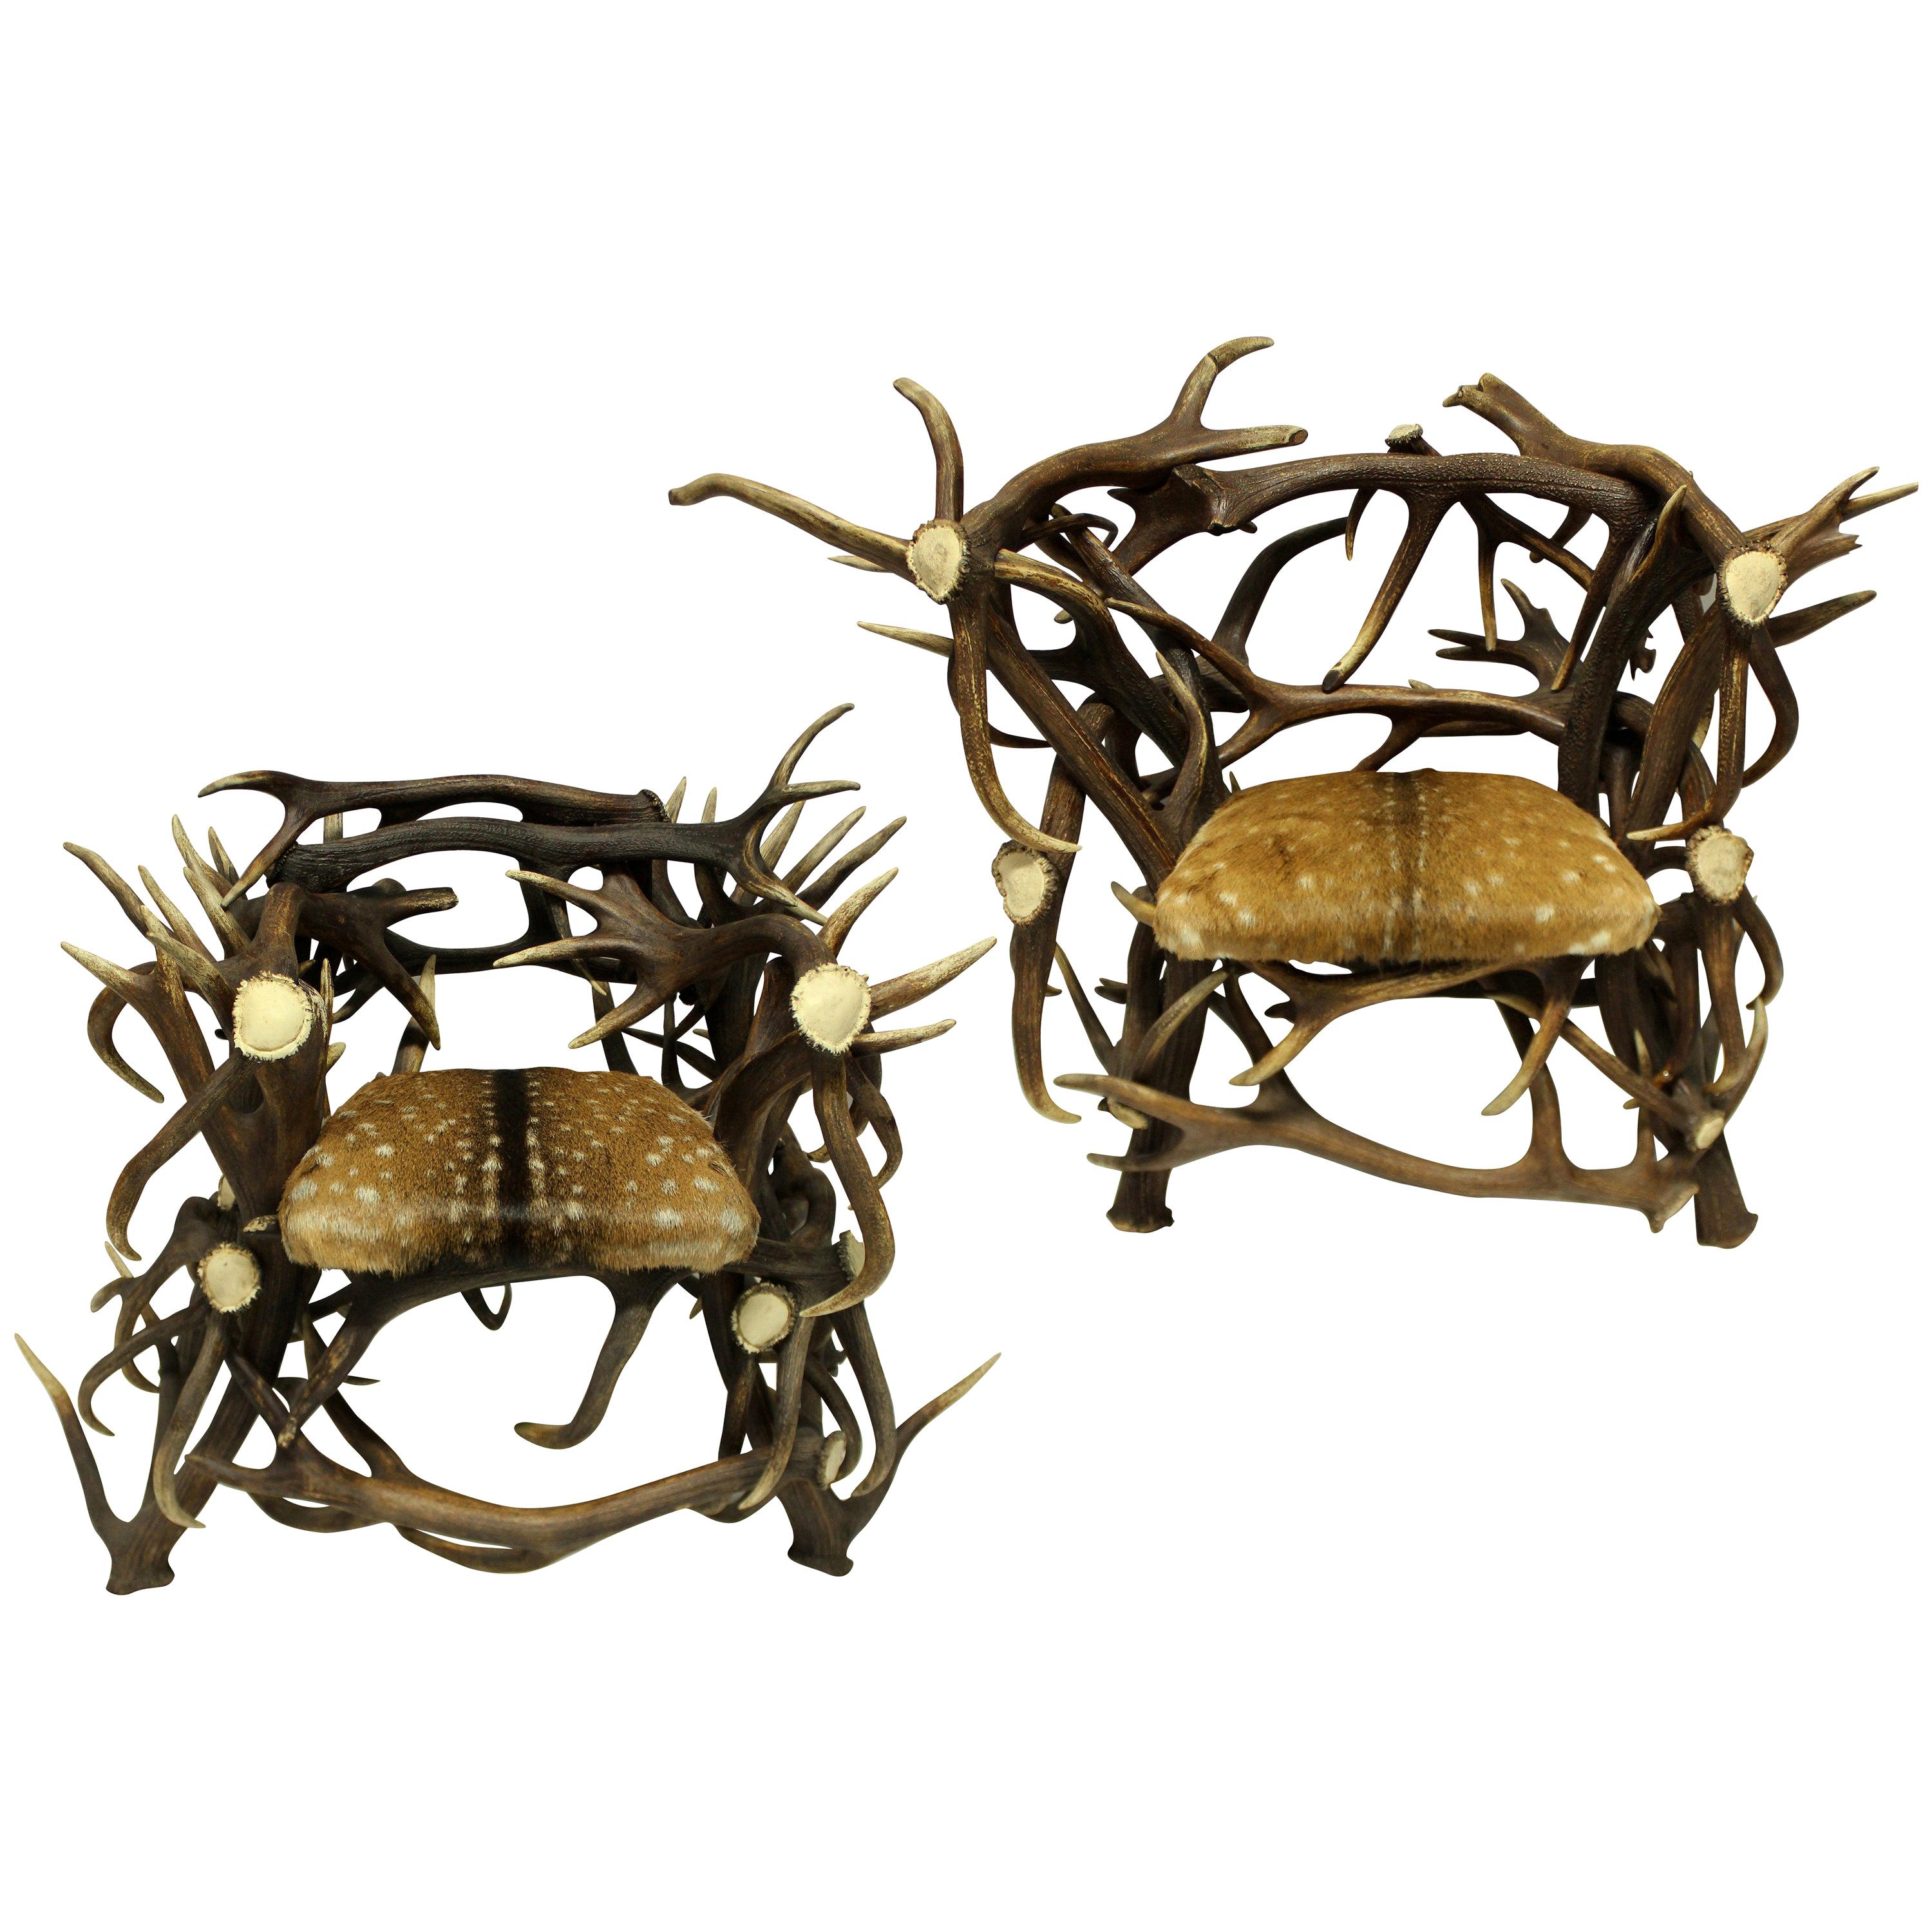 Pair of Large Scottish Antler Trophy Chairs